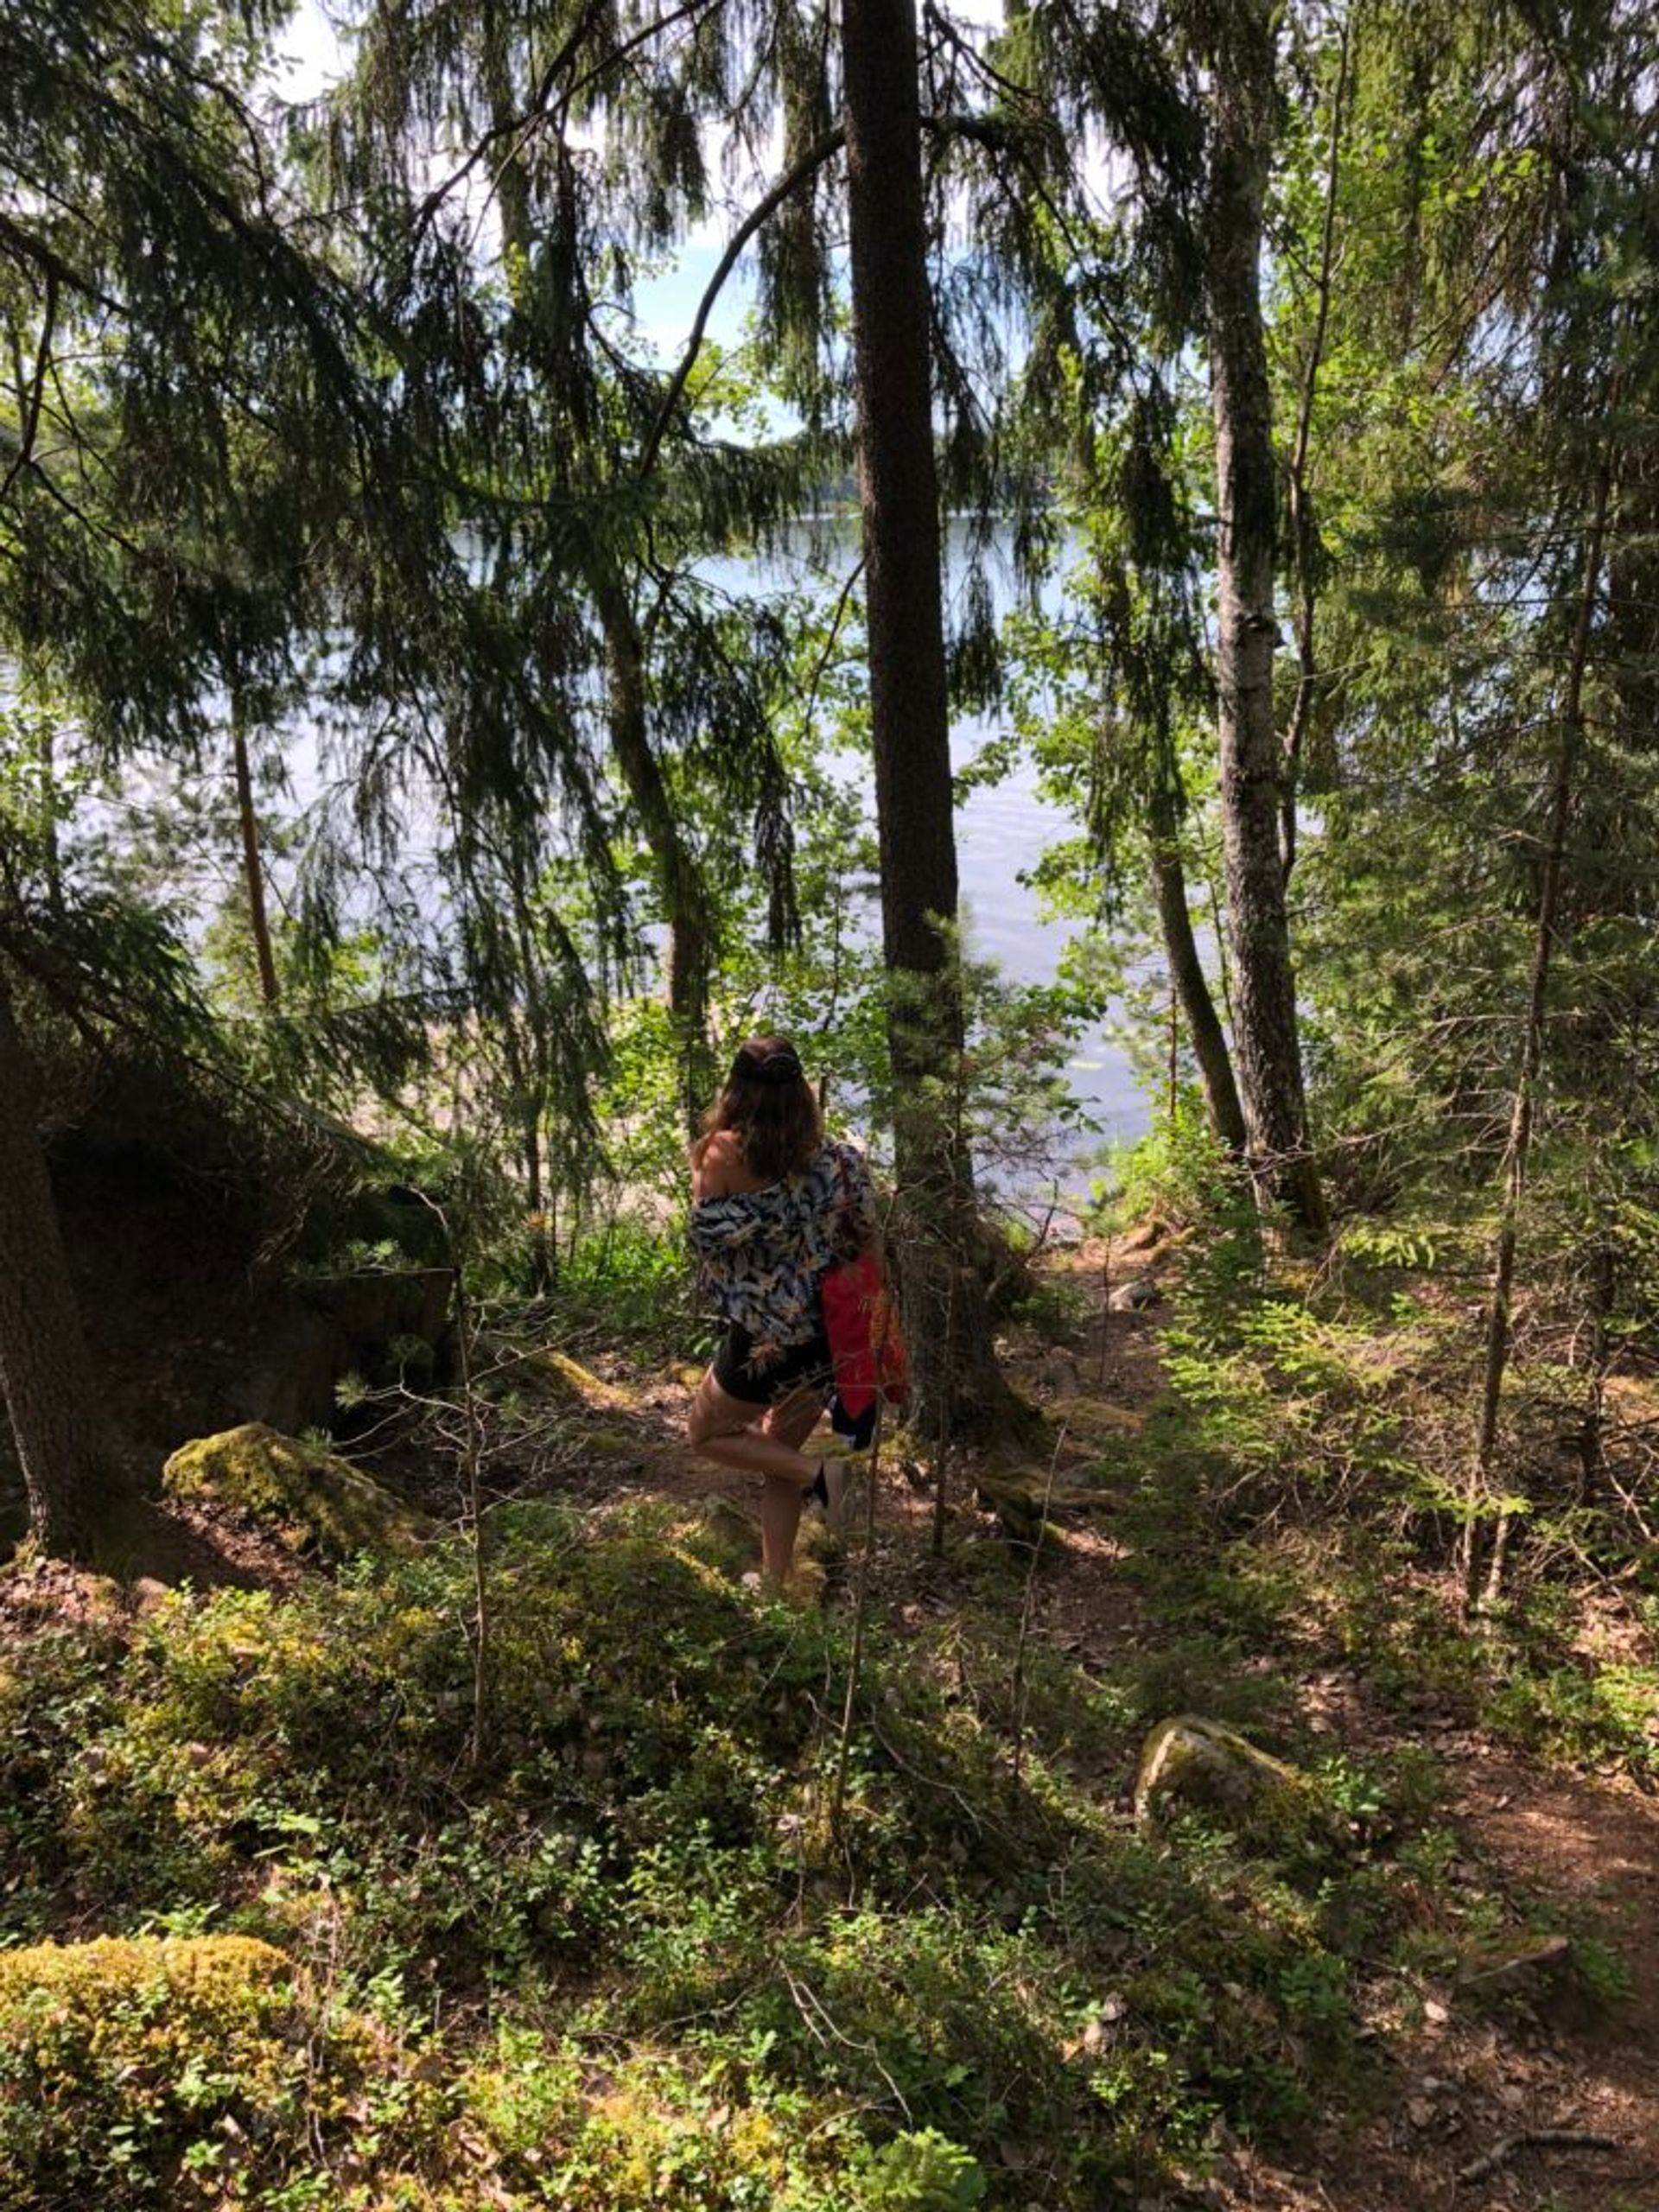 Person walking through a forest.